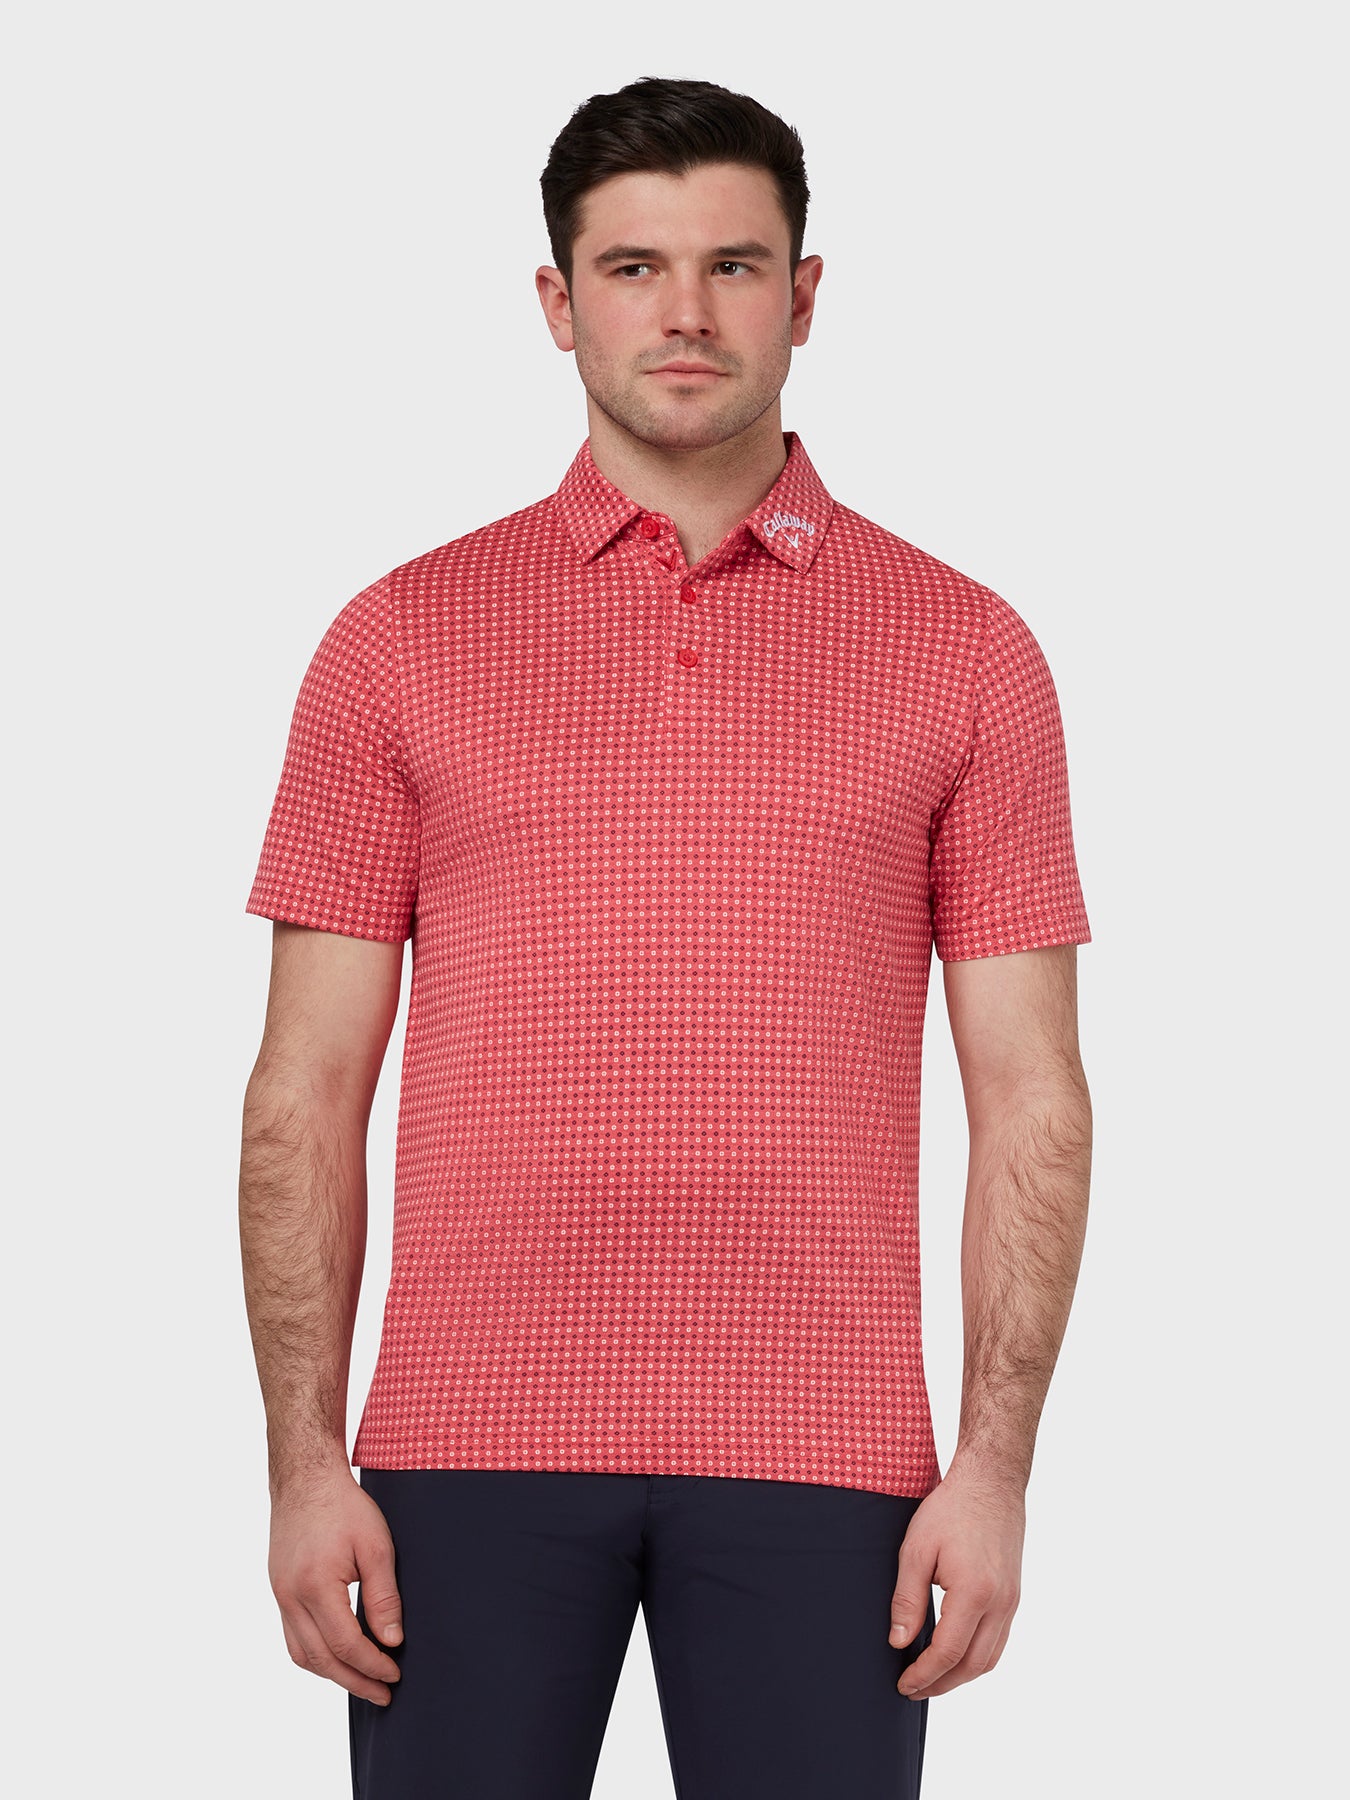 View Soft Touch Micro Print Polo In Teaberry Heather Teaberry Heather L information